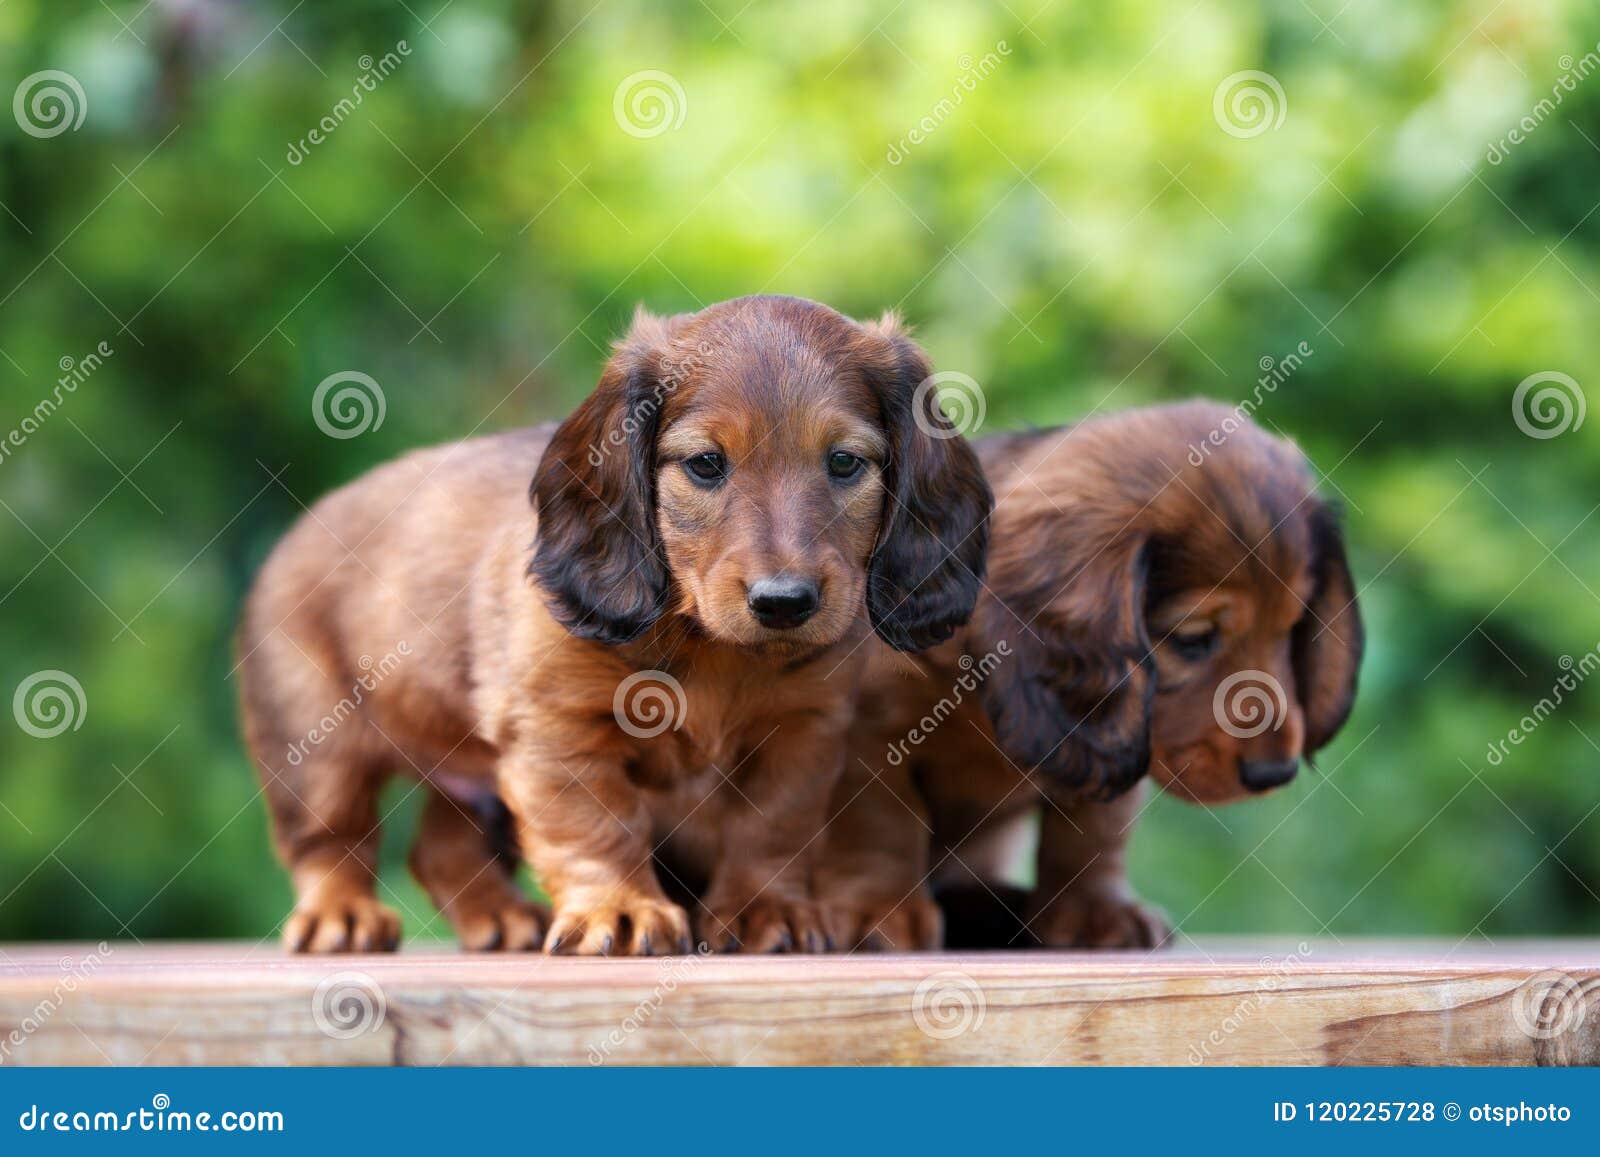 Adorable Dachshund Puppies Outdoors In Summer Stock Photo